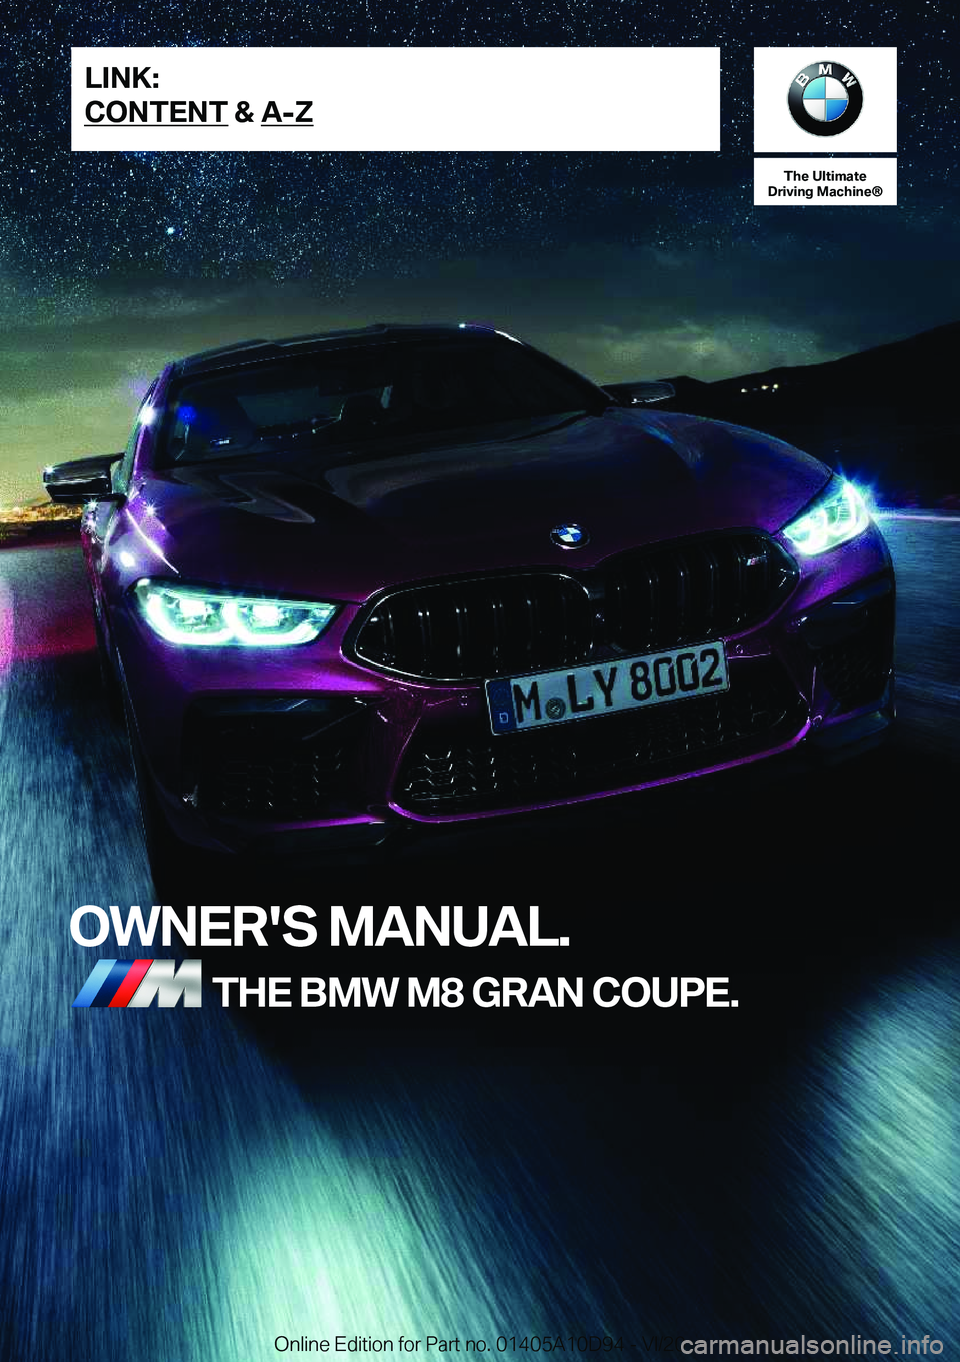 BMW M8 GRAN COUPE 2021  Owners Manual �T�h�e��U�l�t�i�m�a�t�e
�D�r�i�v�i�n�g��M�a�c�h�i�n�e�n
�O�W�N�E�R�'�S��M�A�N�U�A�L�.�T�H�E��B�M�W��M�8��G�R�A�N��C�O�U�P�E�.�L�I�N�K�:
�C�O�N�T�E�N�T��&��A�-�Z�O�n�l�i�n�e��E�d�i�t�i�o�